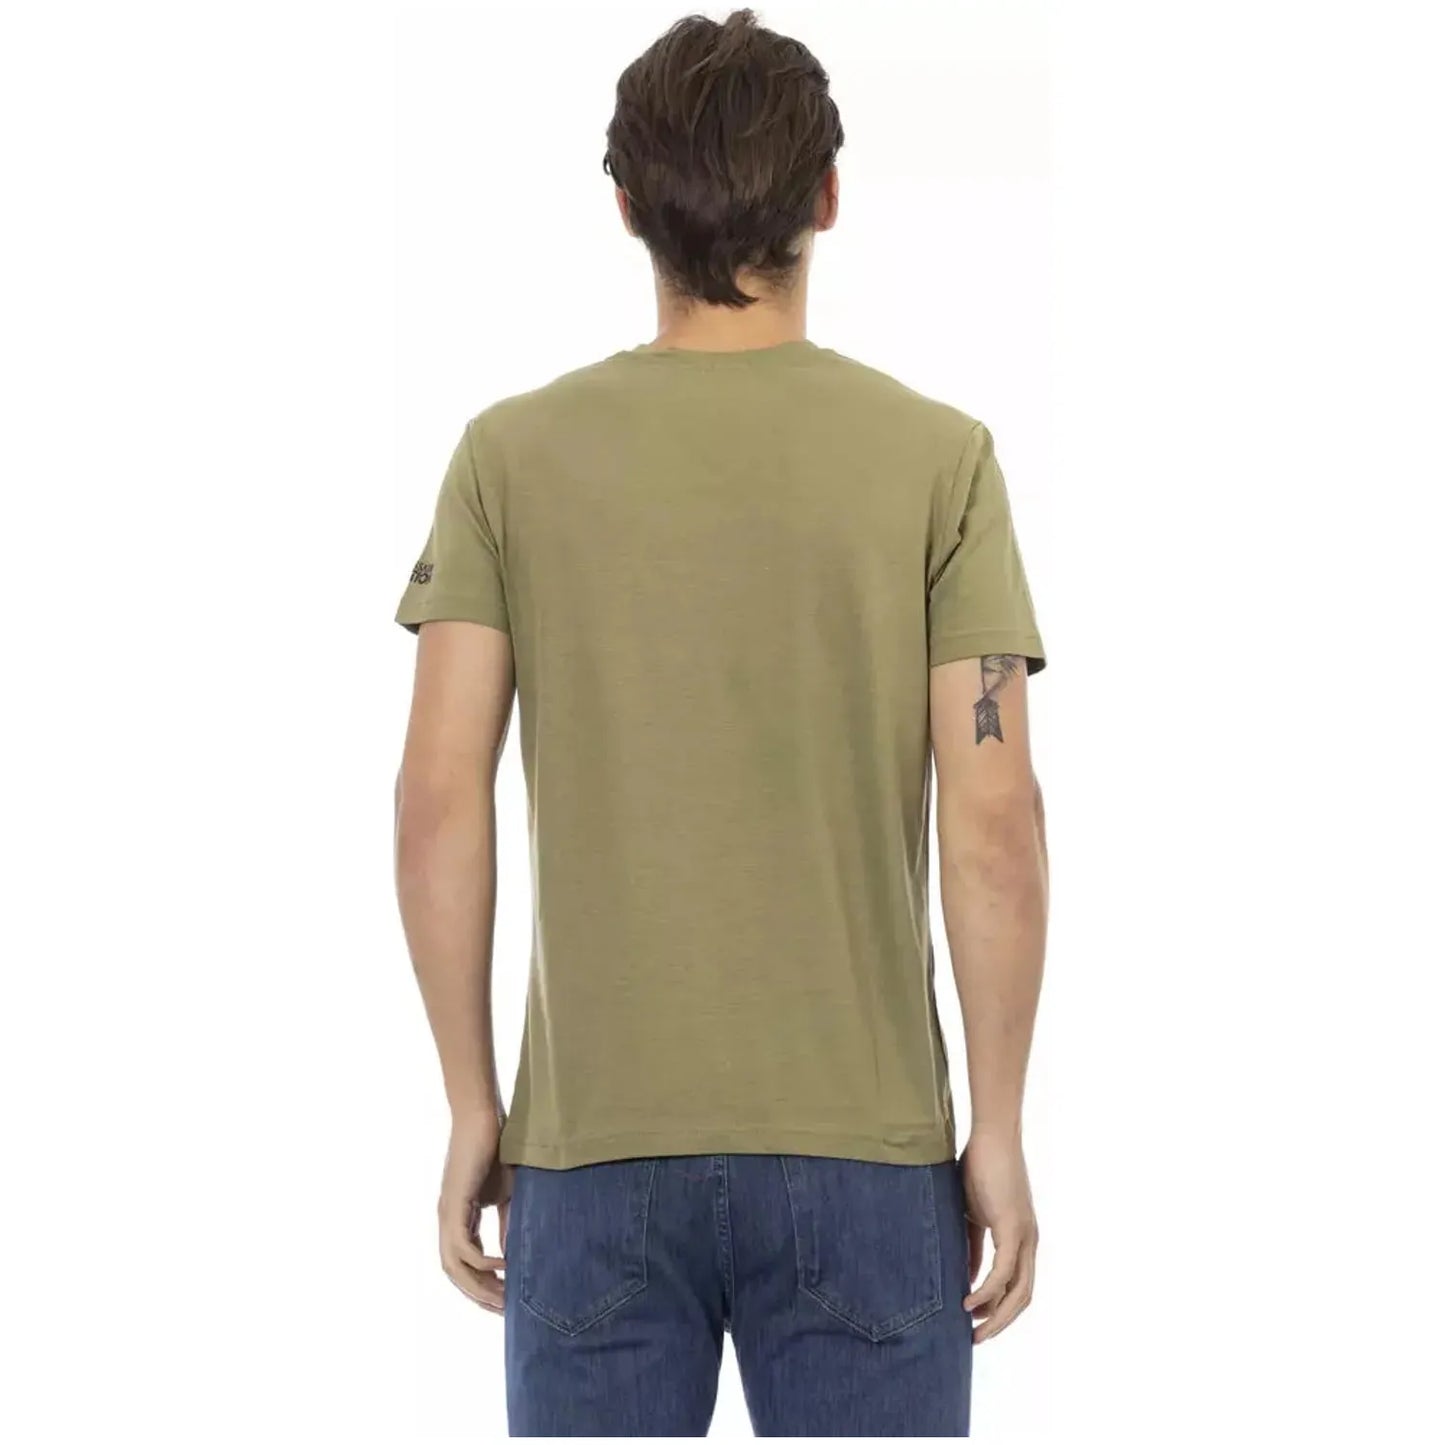 Trussardi Action Elegant V-Neck Tee with Chic Front Print green-cotton-t-shirt-50